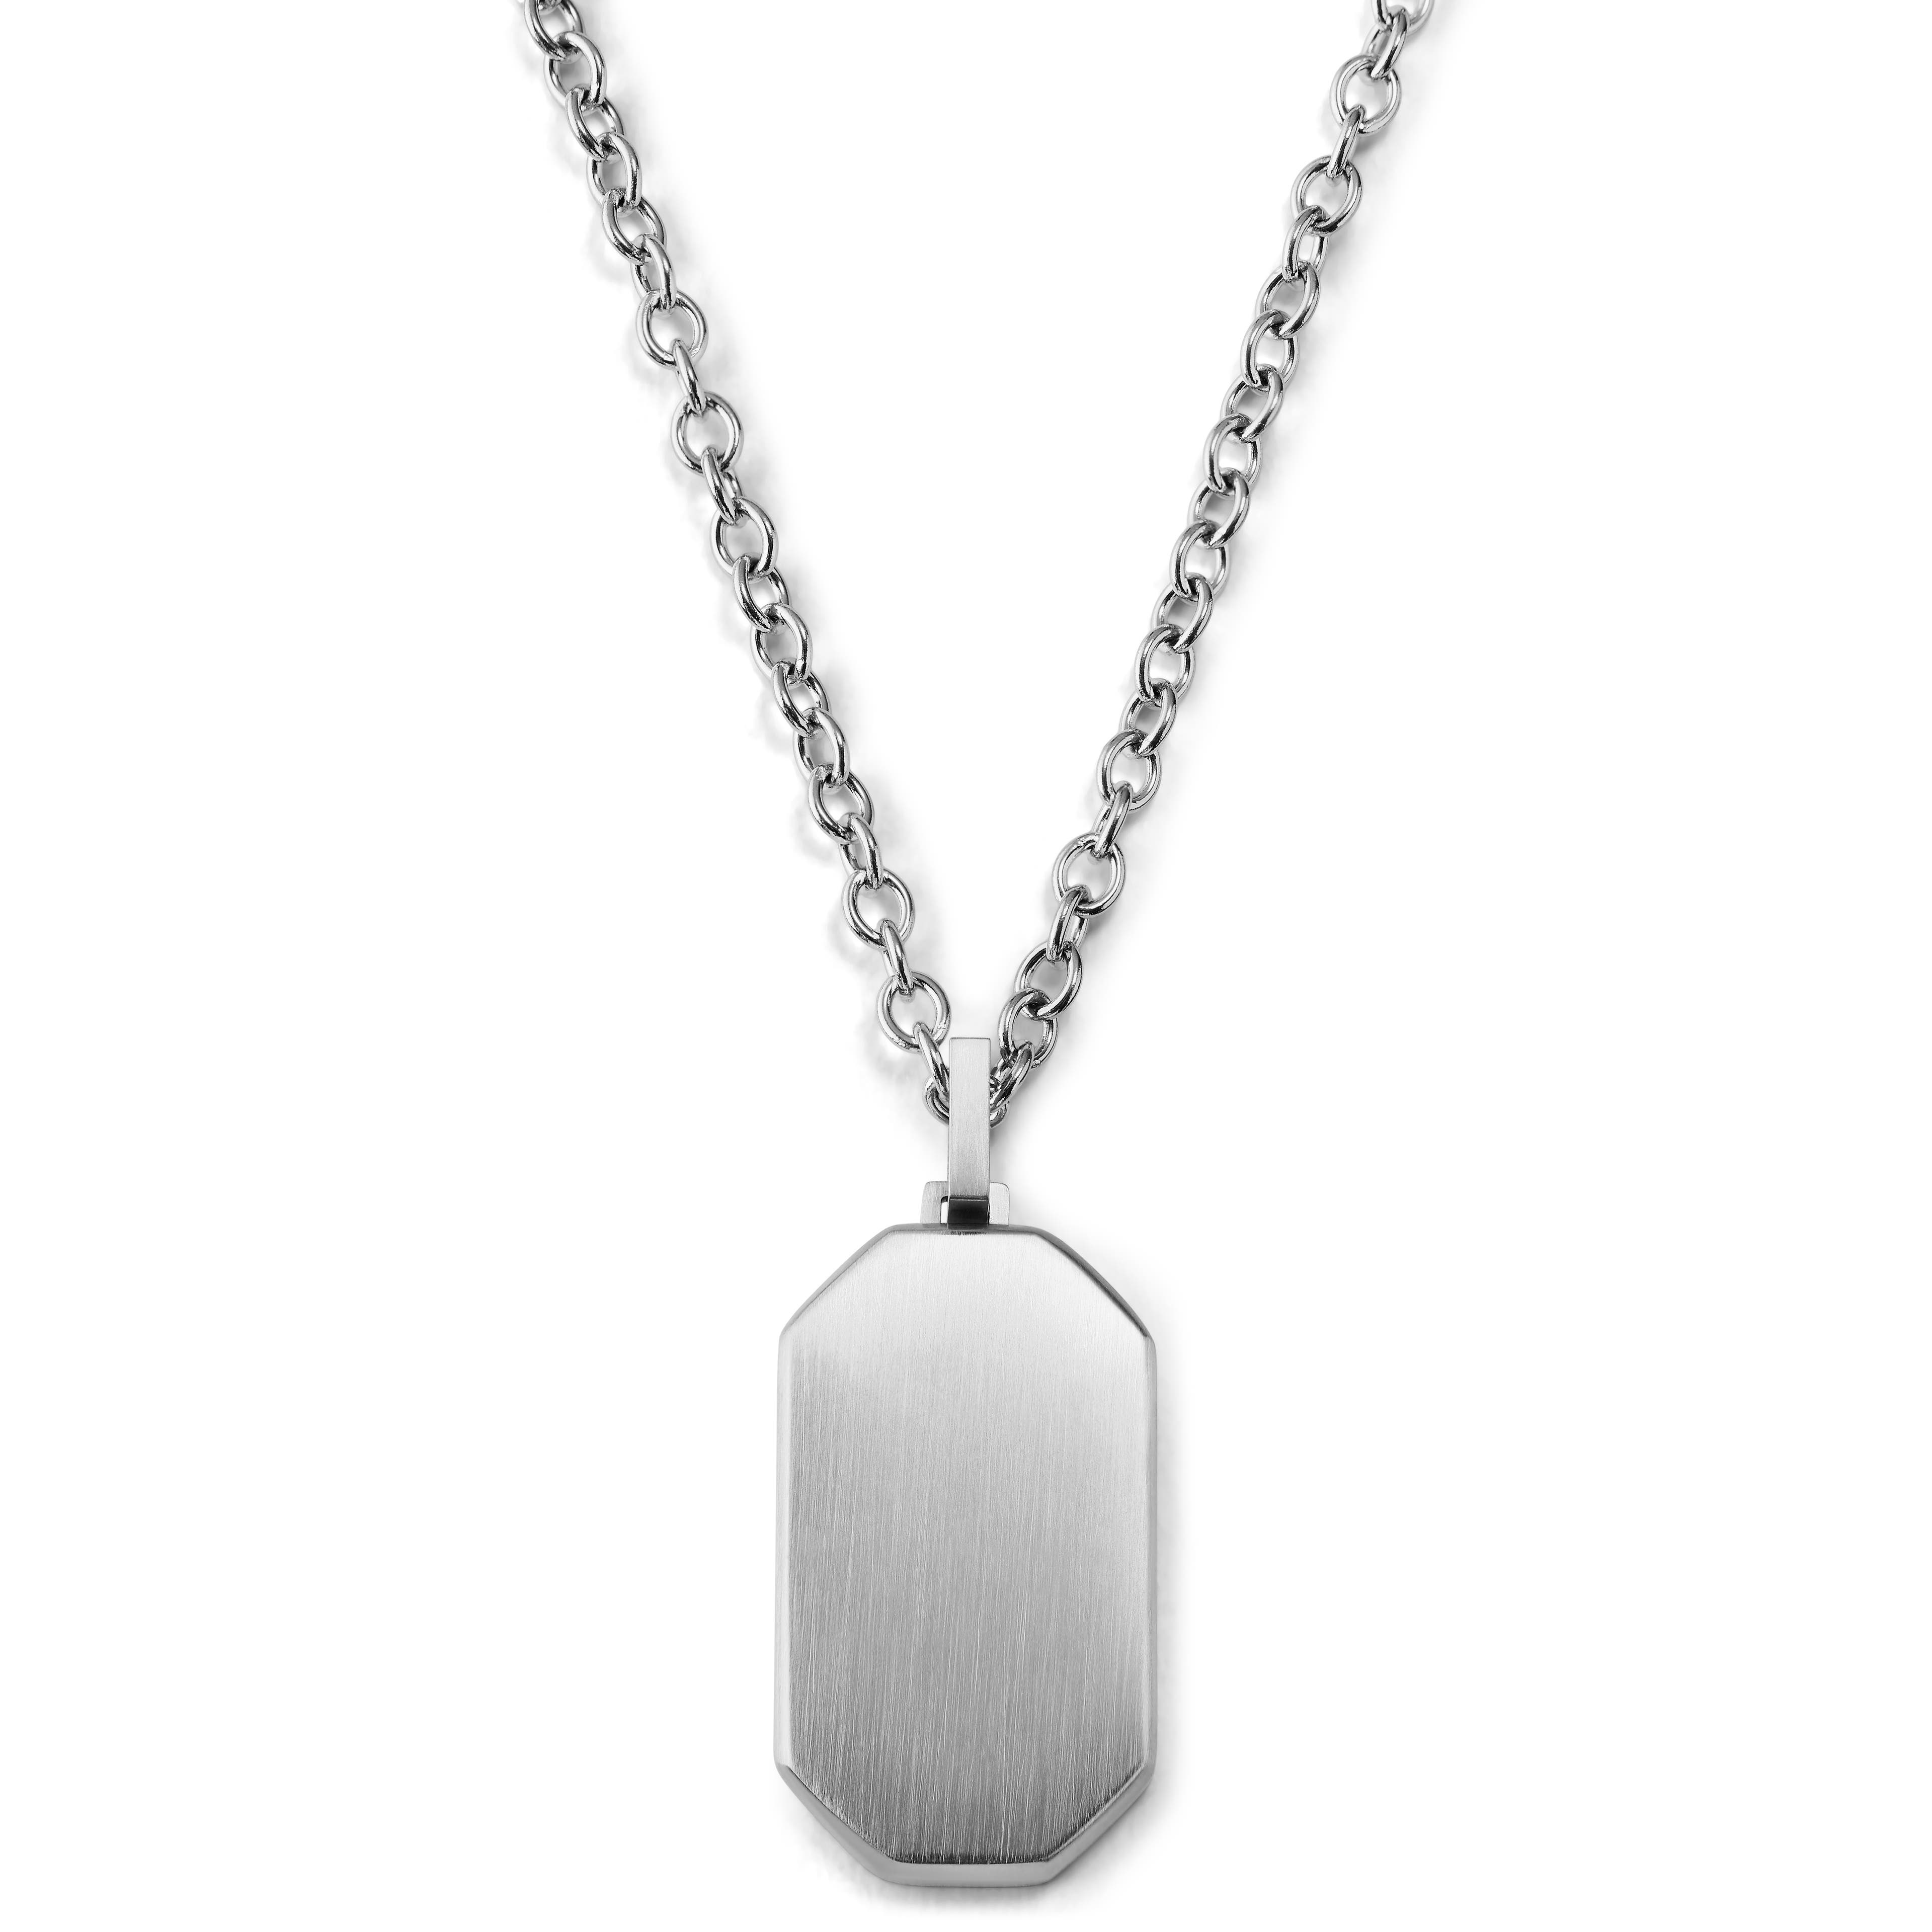 Silver-Tone Stainless Steel Dog Tag Cable Chain Necklace